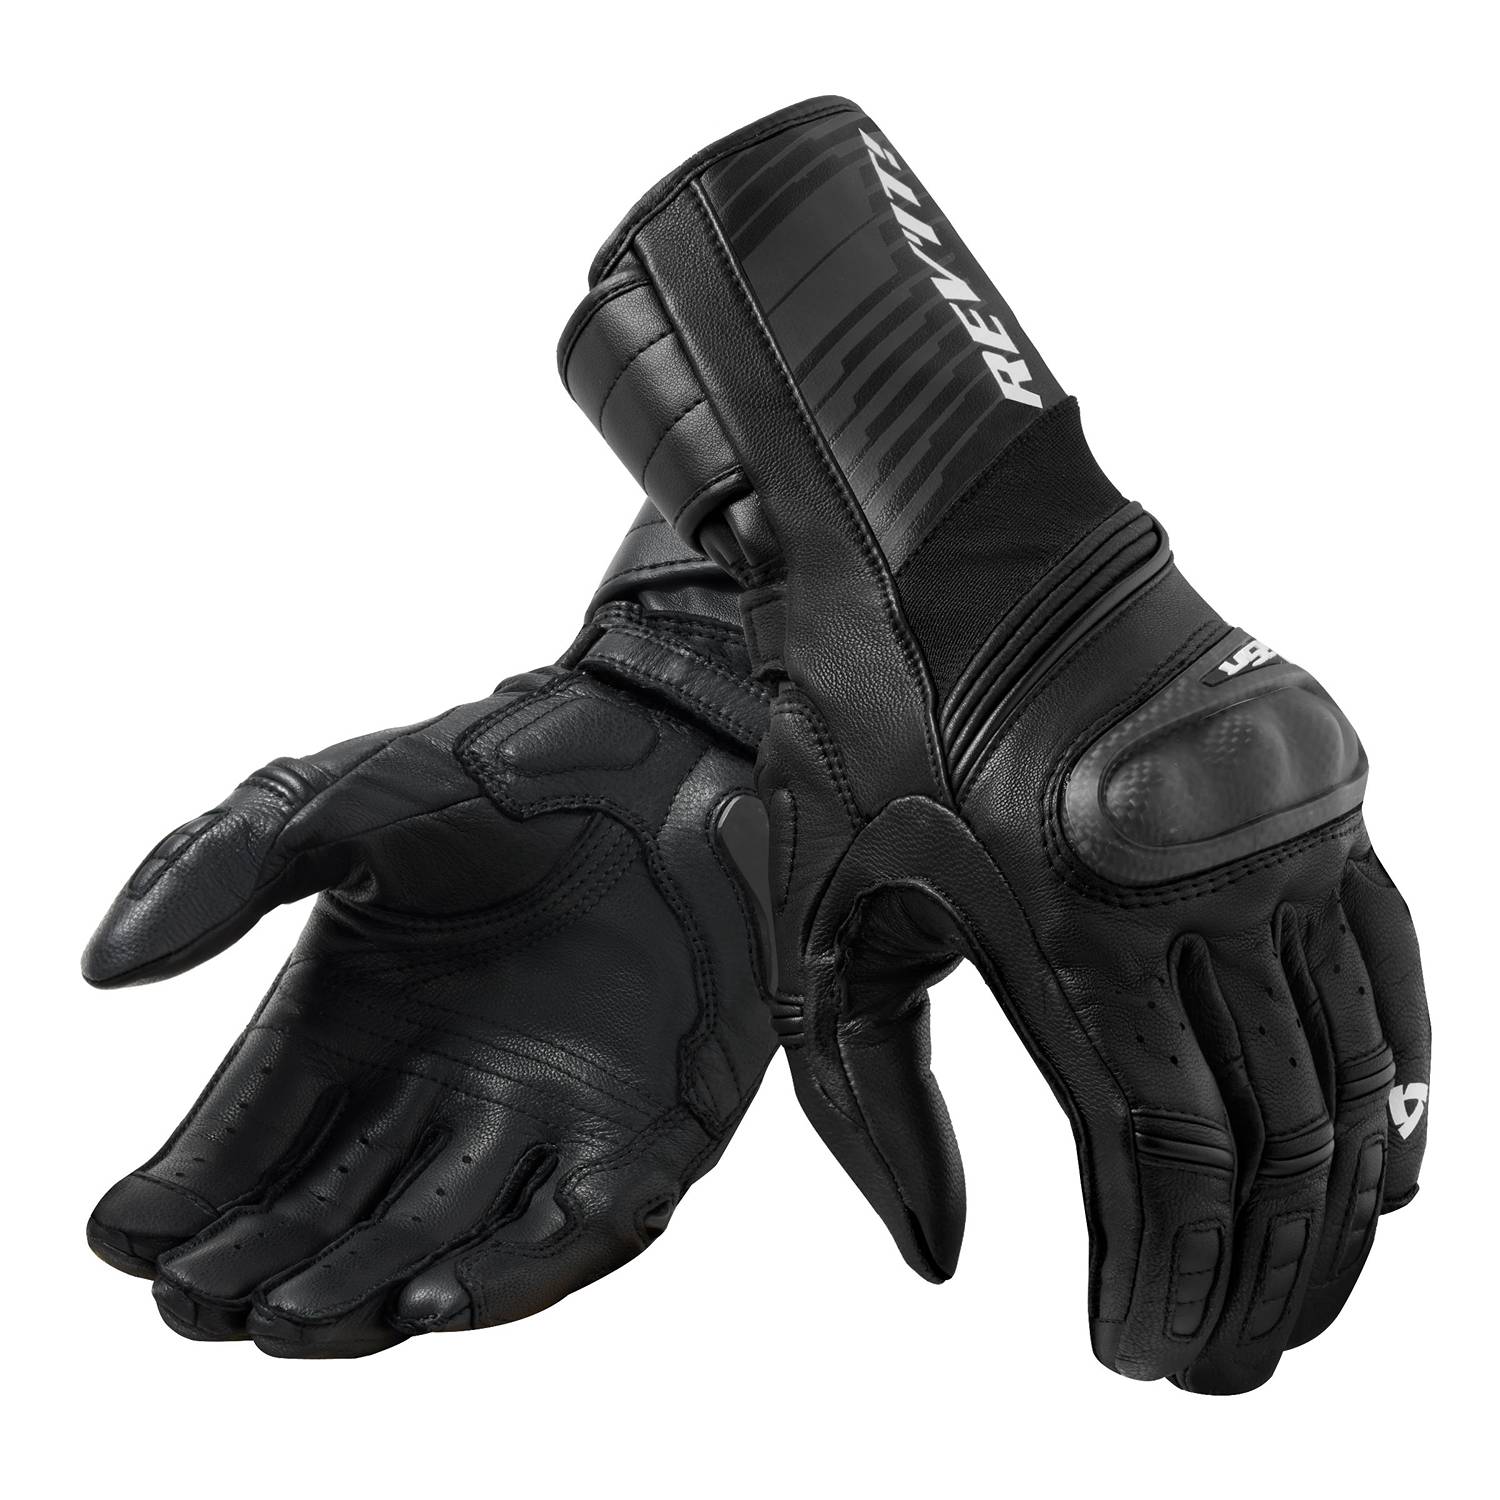 Image of REV'IT! RSR 4 Gloves Black Anthracite Size 3XL ID 8700001306720